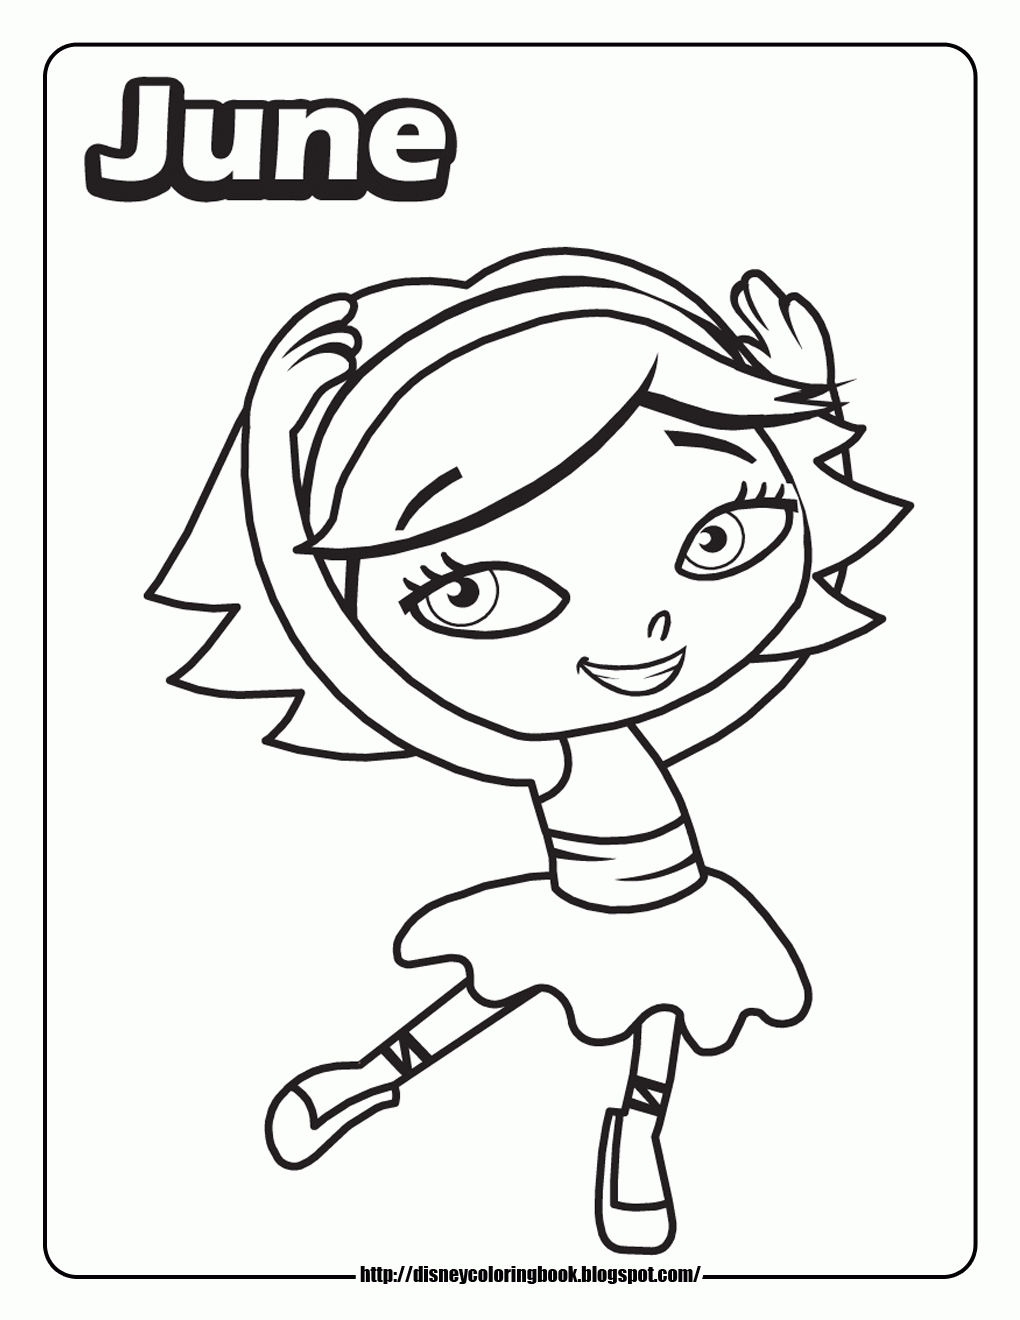 Annie Little Einsteins Coloring Pages - Coloring Pages For All Ages